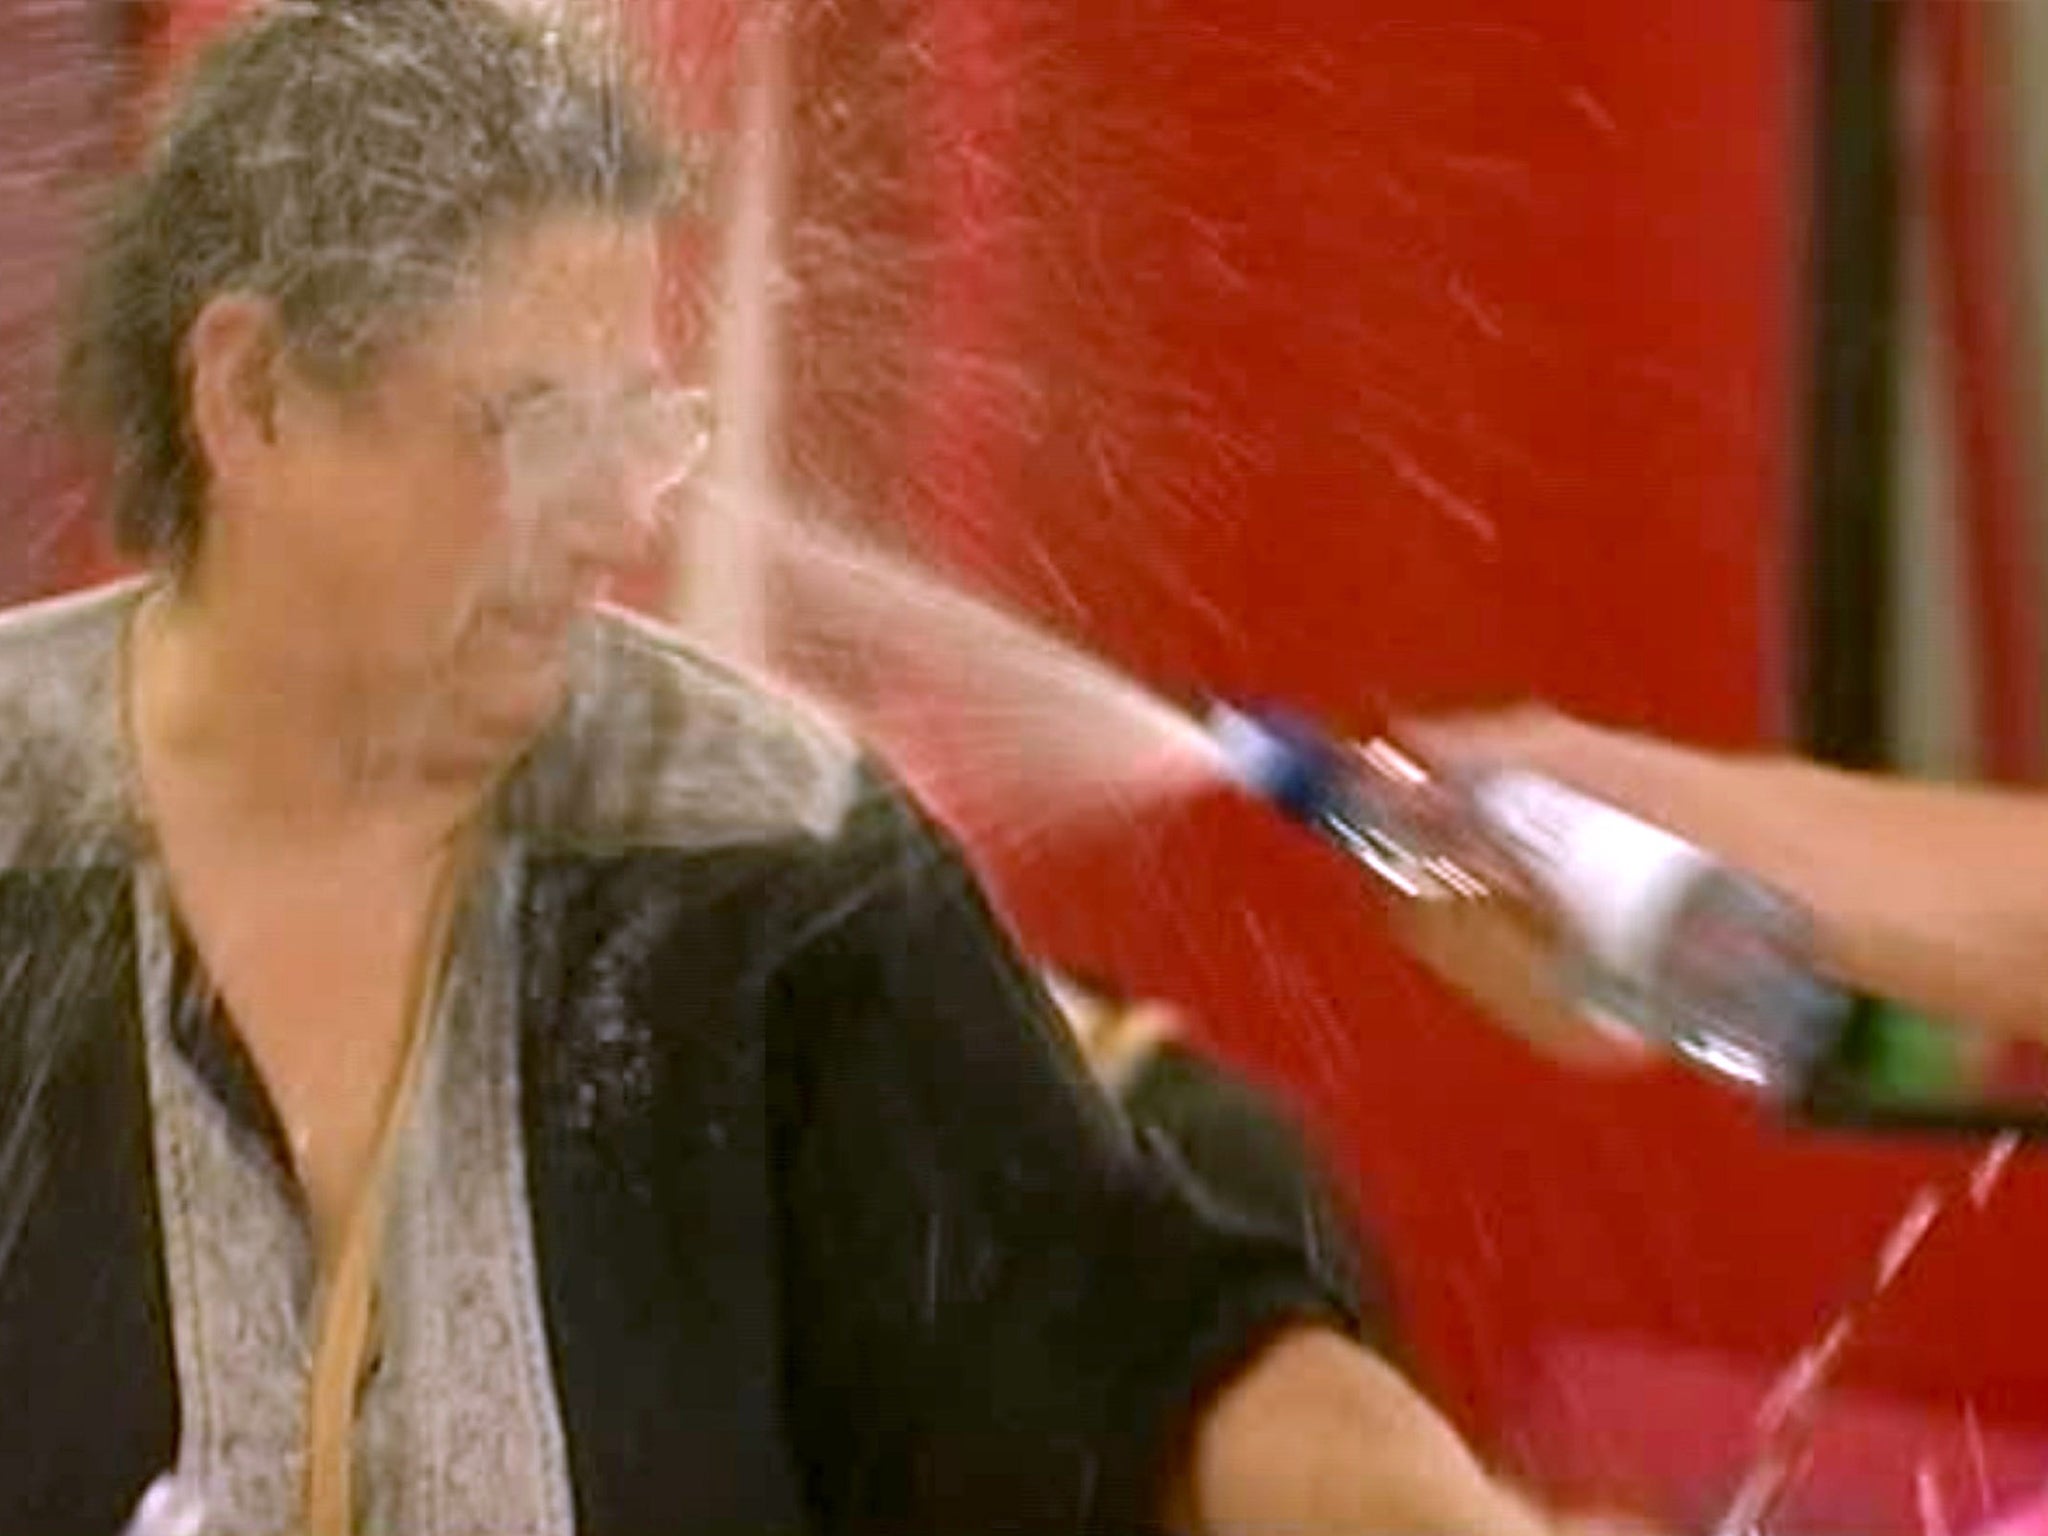 Ziggy squirts water in Carol's face during a water fight in Big Brother 8 in 2007